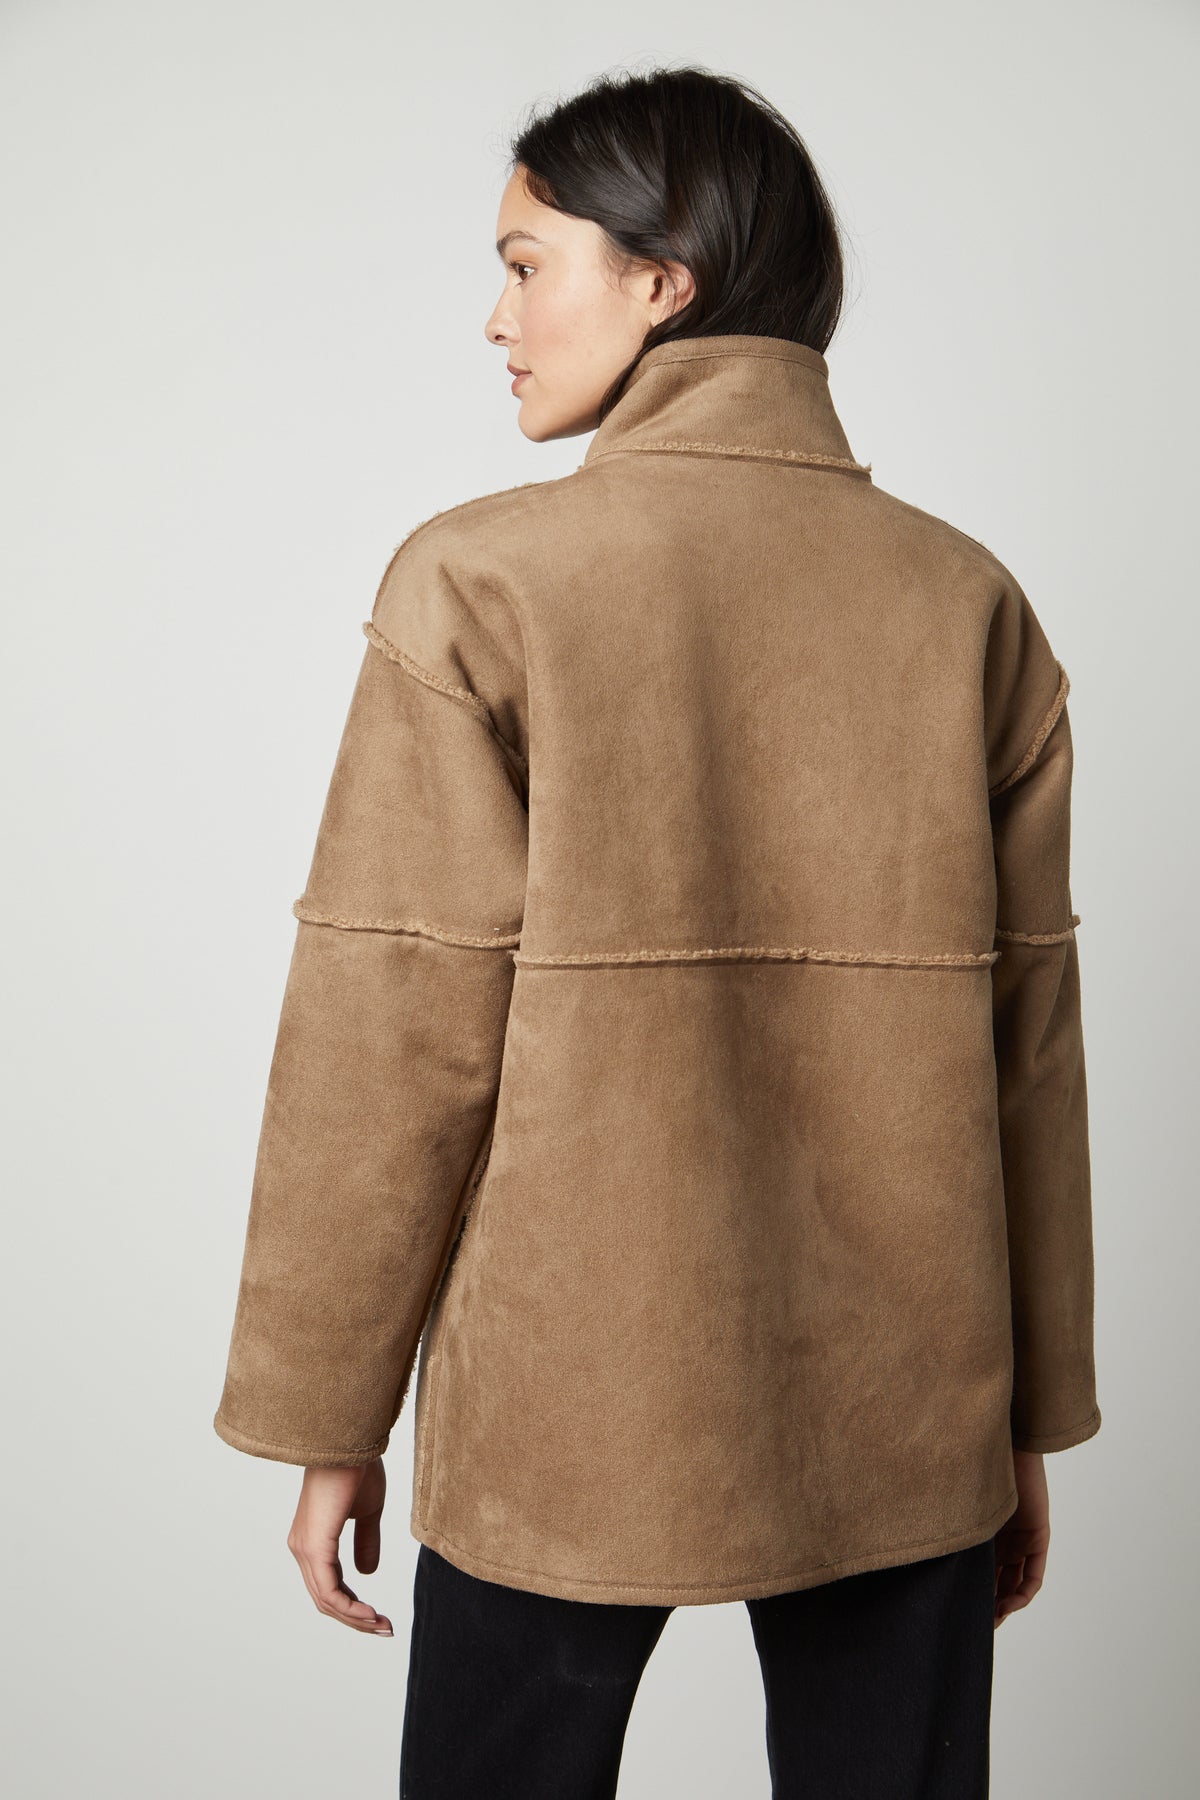   The back view of a woman wearing a Velvet by Graham & Spencer ALBANY LUX SHERPA REVERSIBLE JACKET. 